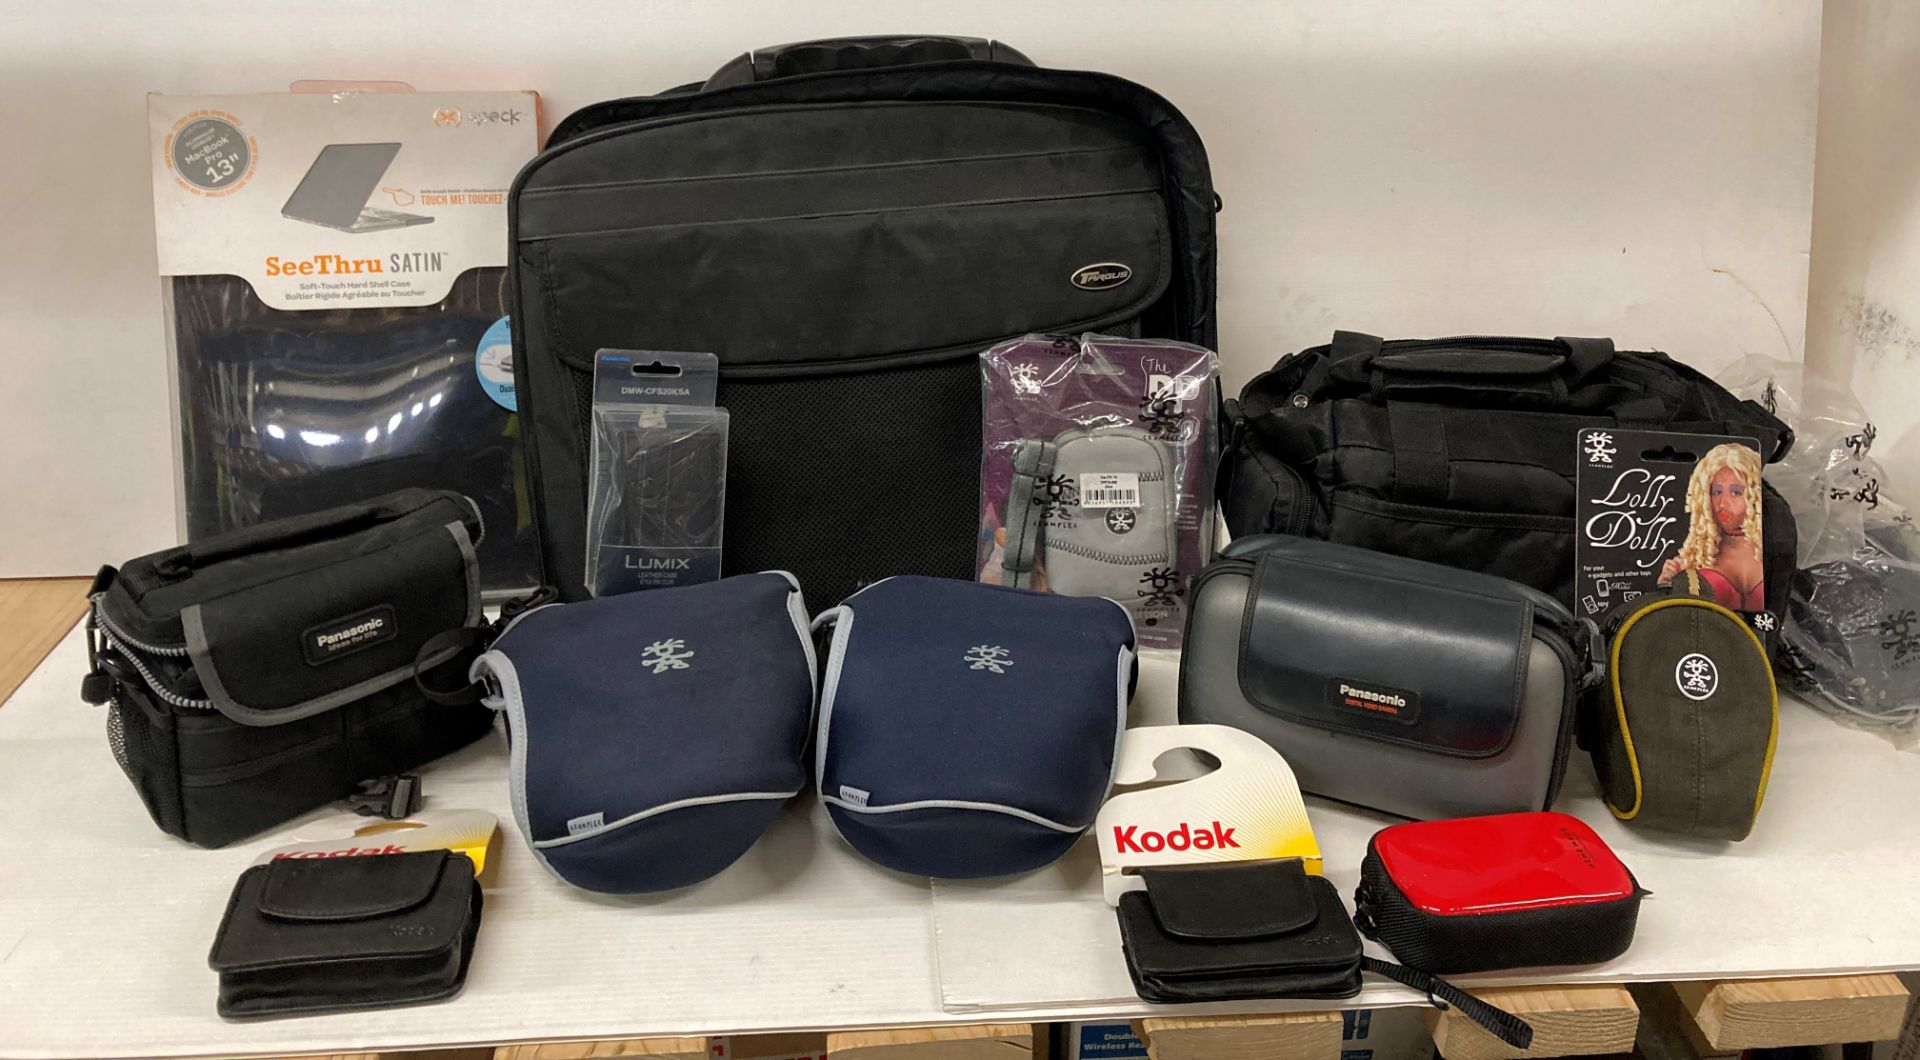 Contents to crate - quantity of camera bags and laptop cases (saleroom location: J10 FLOOR)